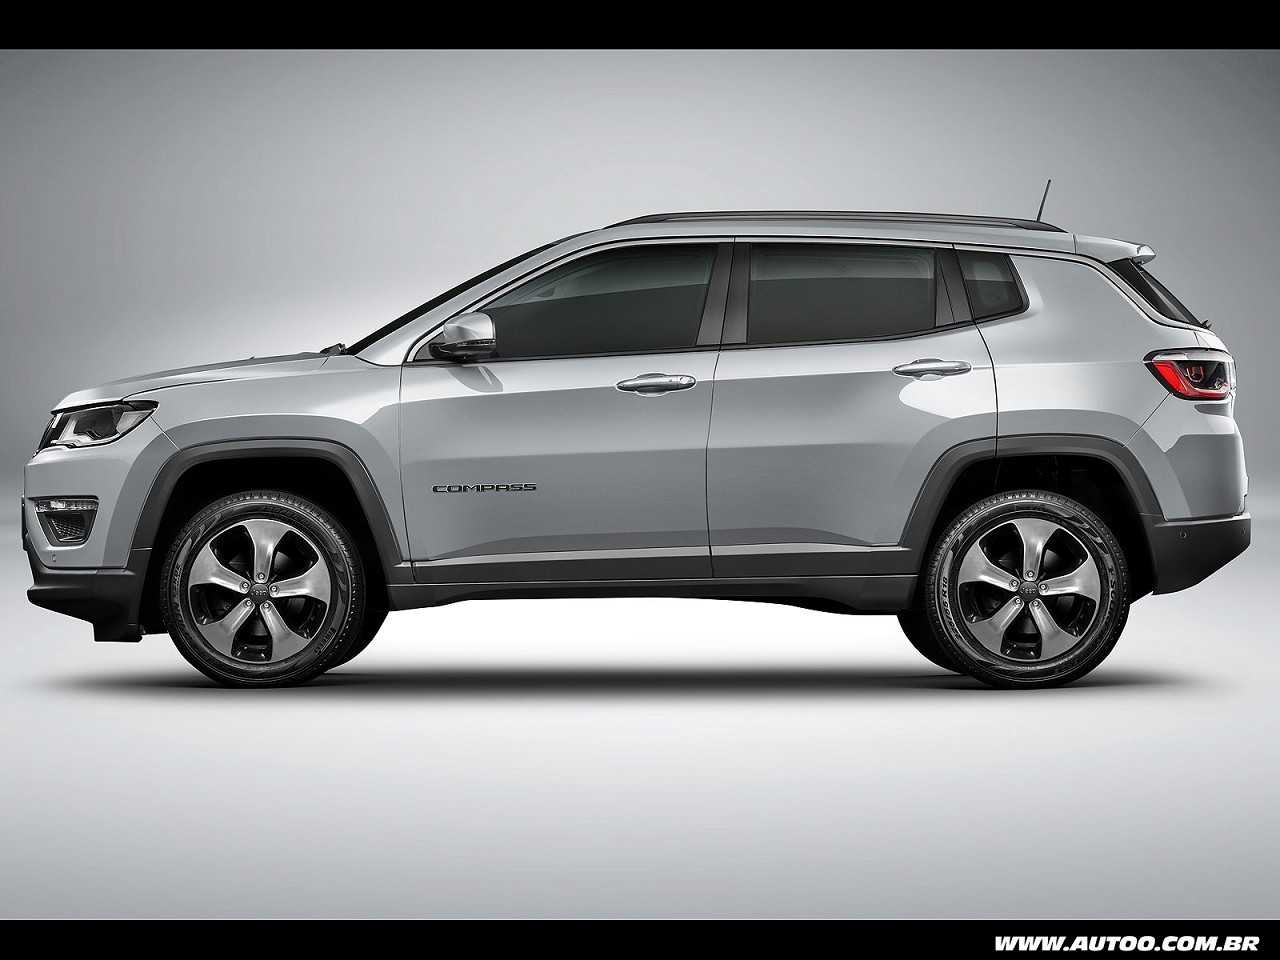 JeepCompass 2017 - lateral